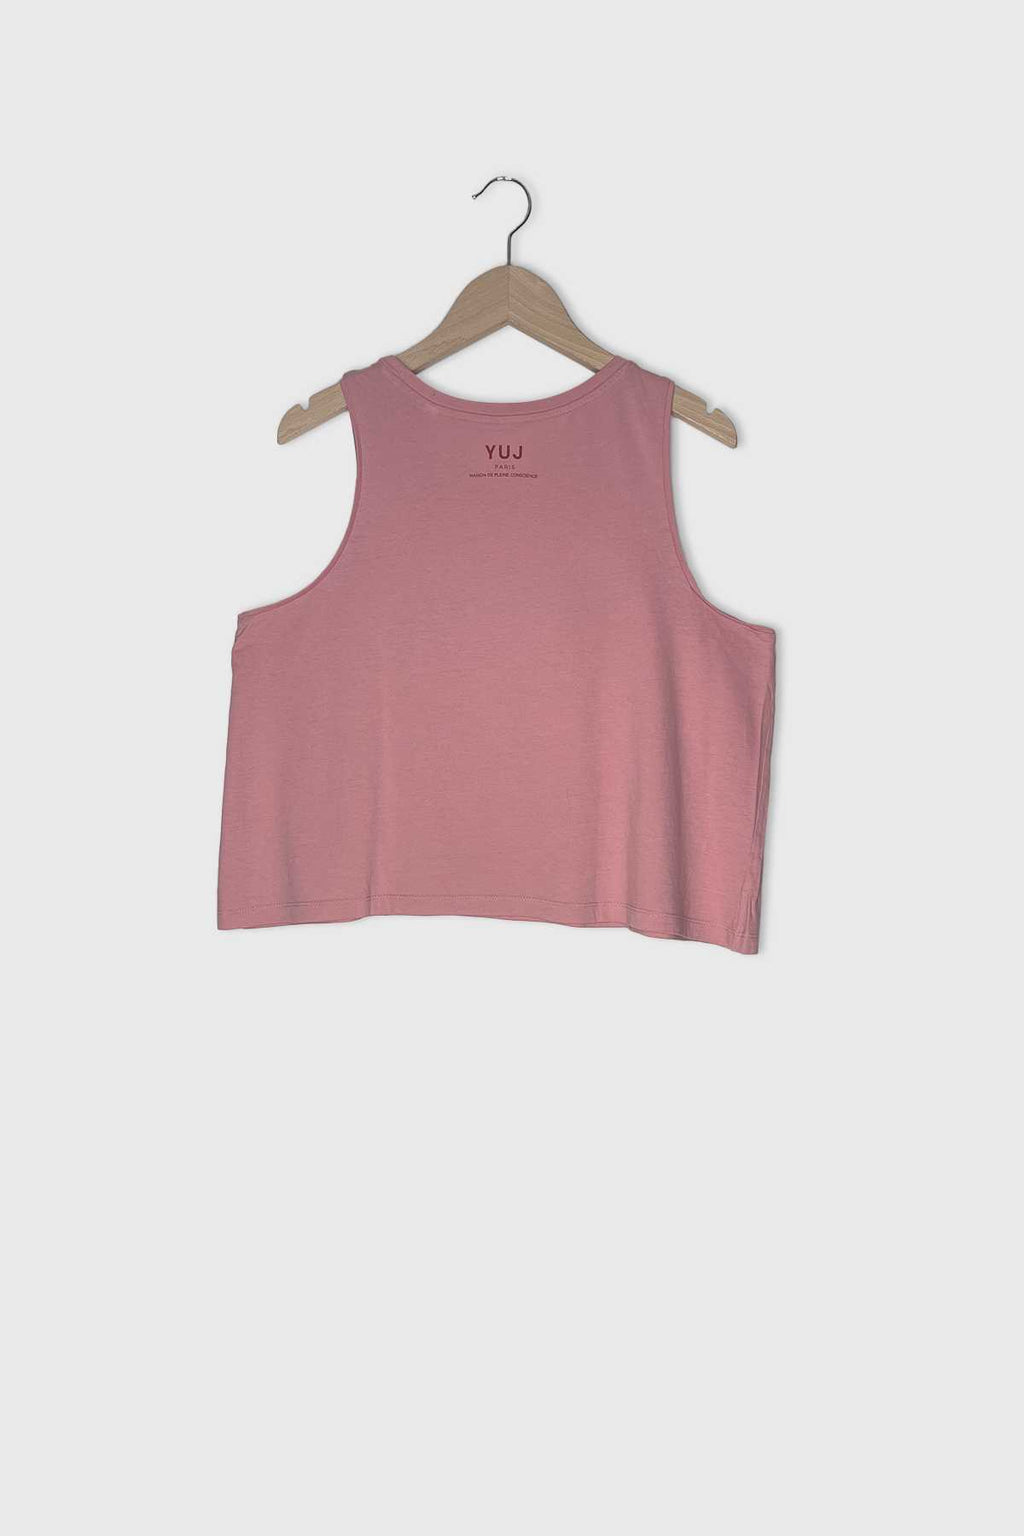 #150 - Good Vibes Only tank top // Size S YUJ - House of Mindfulness